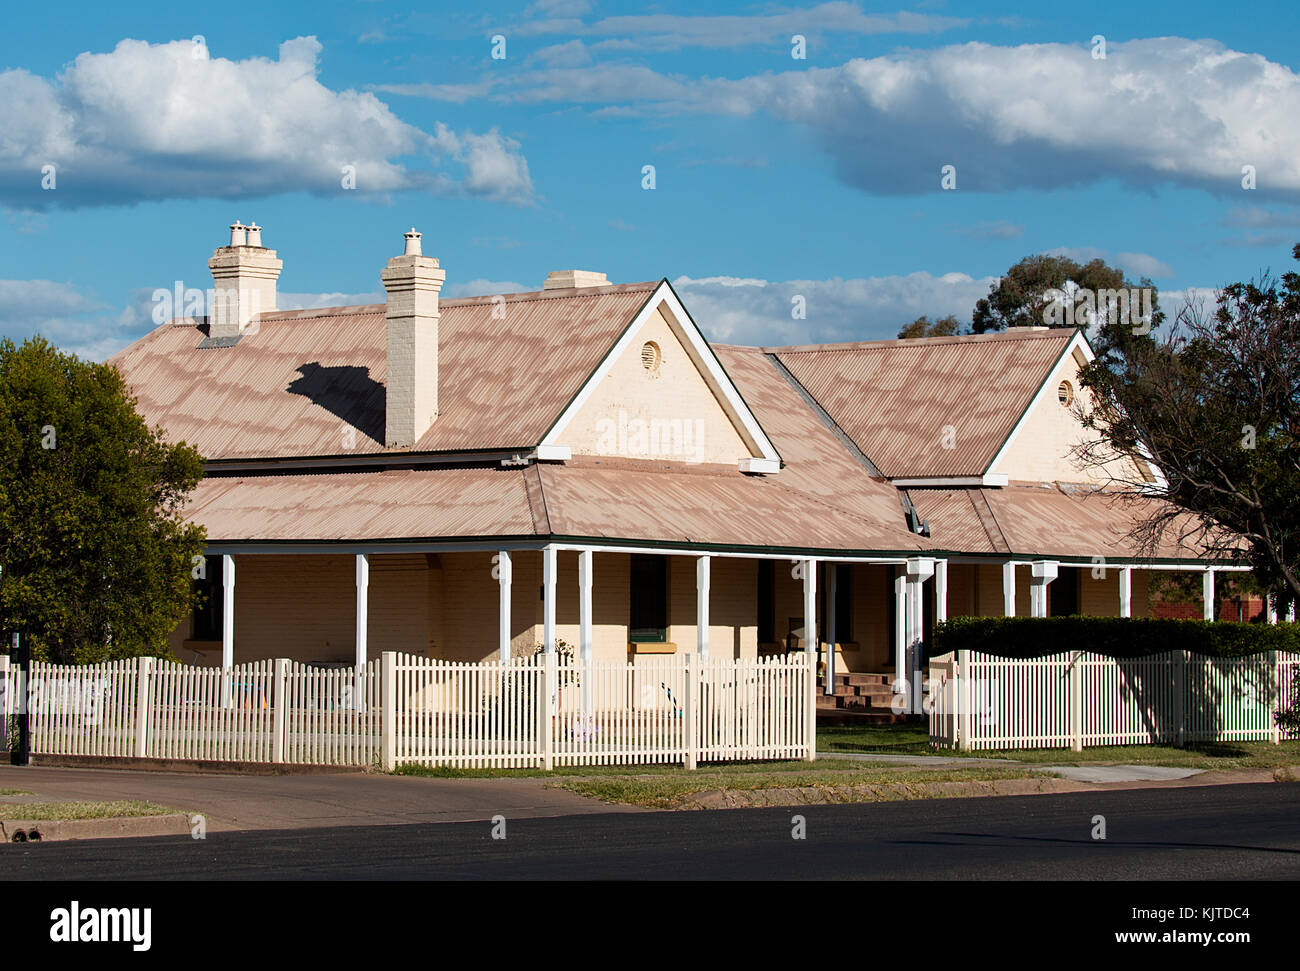 The Police Sergeant’s residence (1880) and later became the Lock Up Keeper’s residence. Narrabri NSW Australia Stock Photo